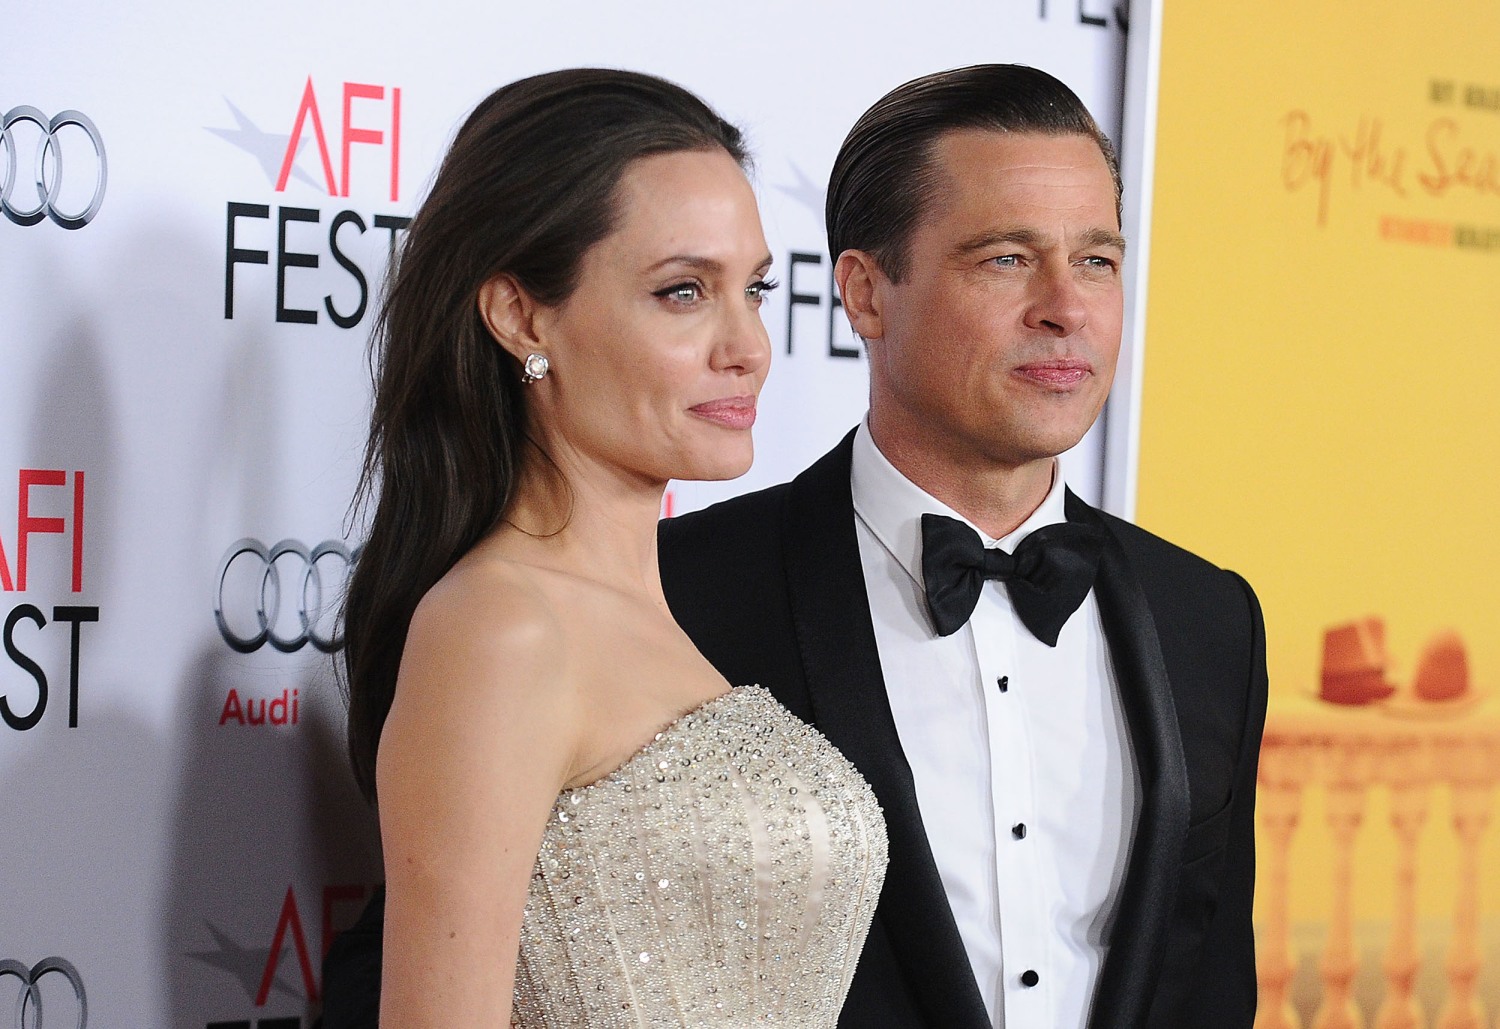 Brad Pitt and Angelina Jolie's Relationship: A Look Back